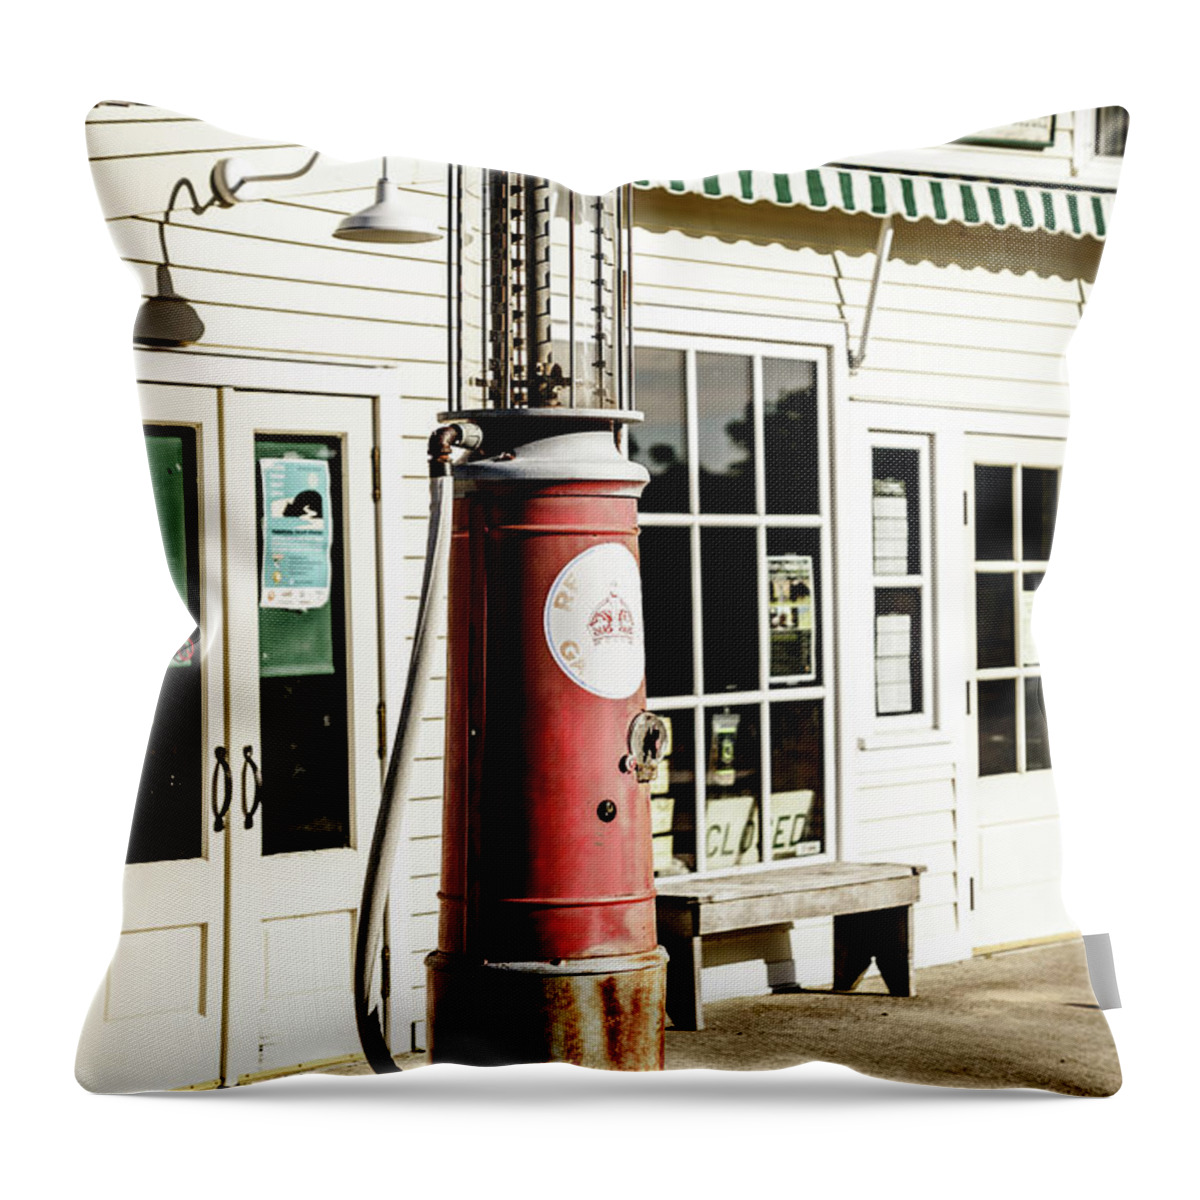 America Throw Pillow featuring the photograph Old fuel pump by Alexey Stiop